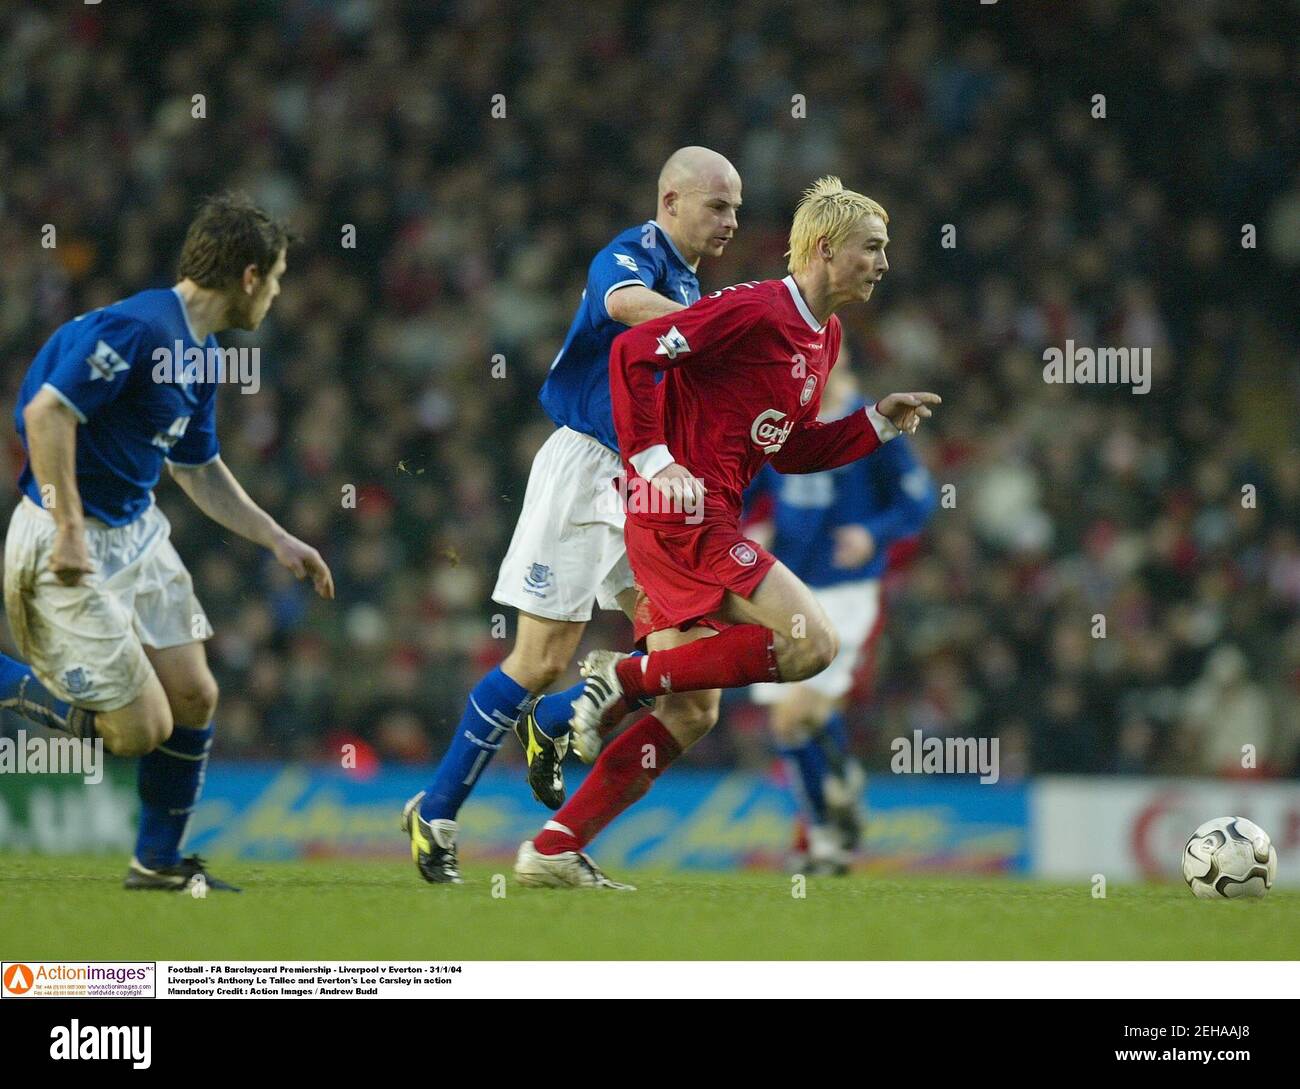 Football - FA Barclaycard Premiership - Liverpool v Everton - 31/1/04  Liverpool's Anthony Le Tallec and Everton's Lee Carsley in action  Mandatory Credit : Action Images / Andrew Budd Stock Photo